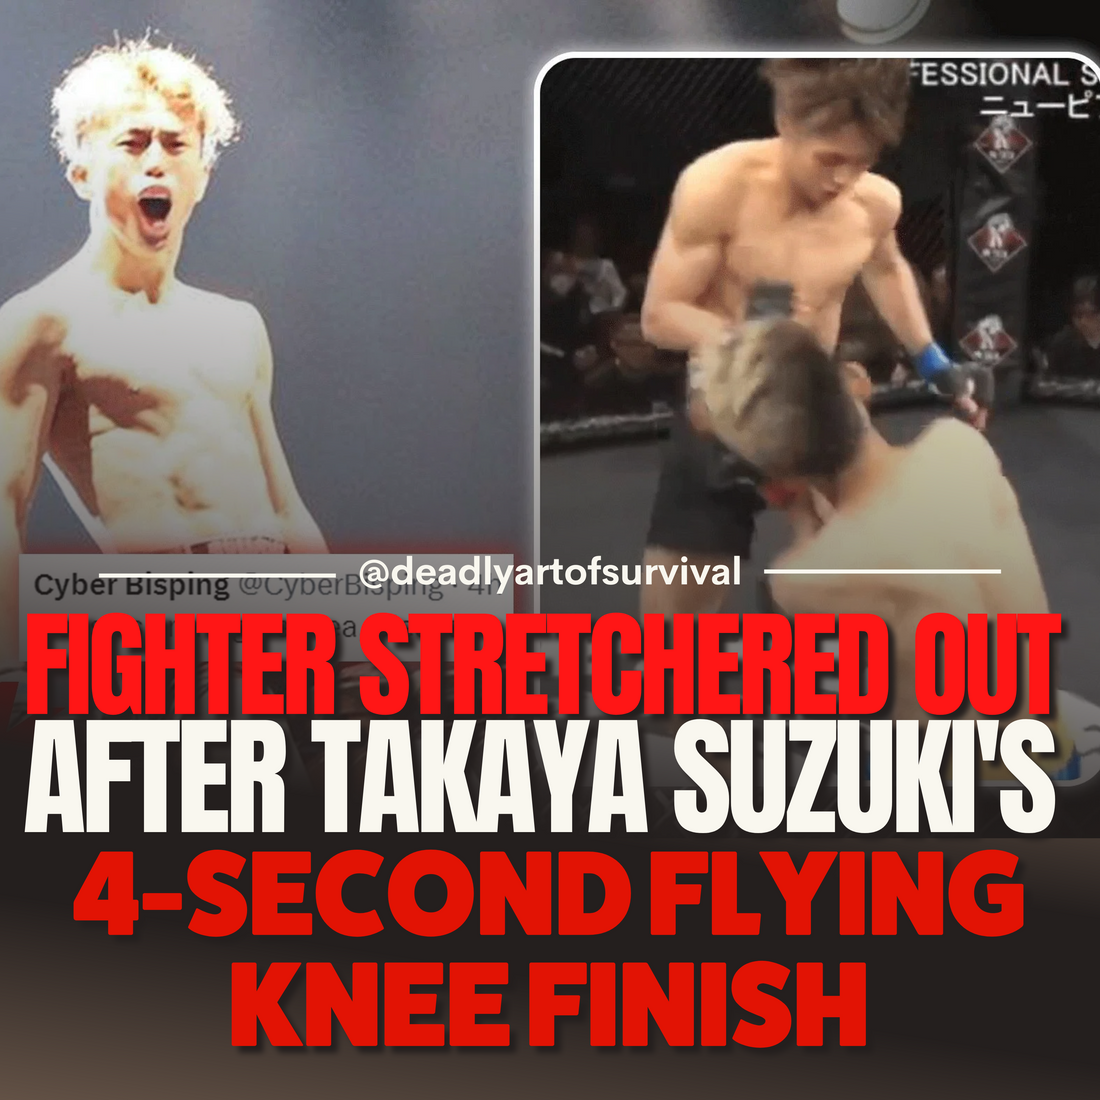 Stunning-4-Second-Knockout-Leaves-Fighter-Carried-Out-on-Stretcher-Thanks-to-Takaya-Suzuki deadlyartofsurvival.com